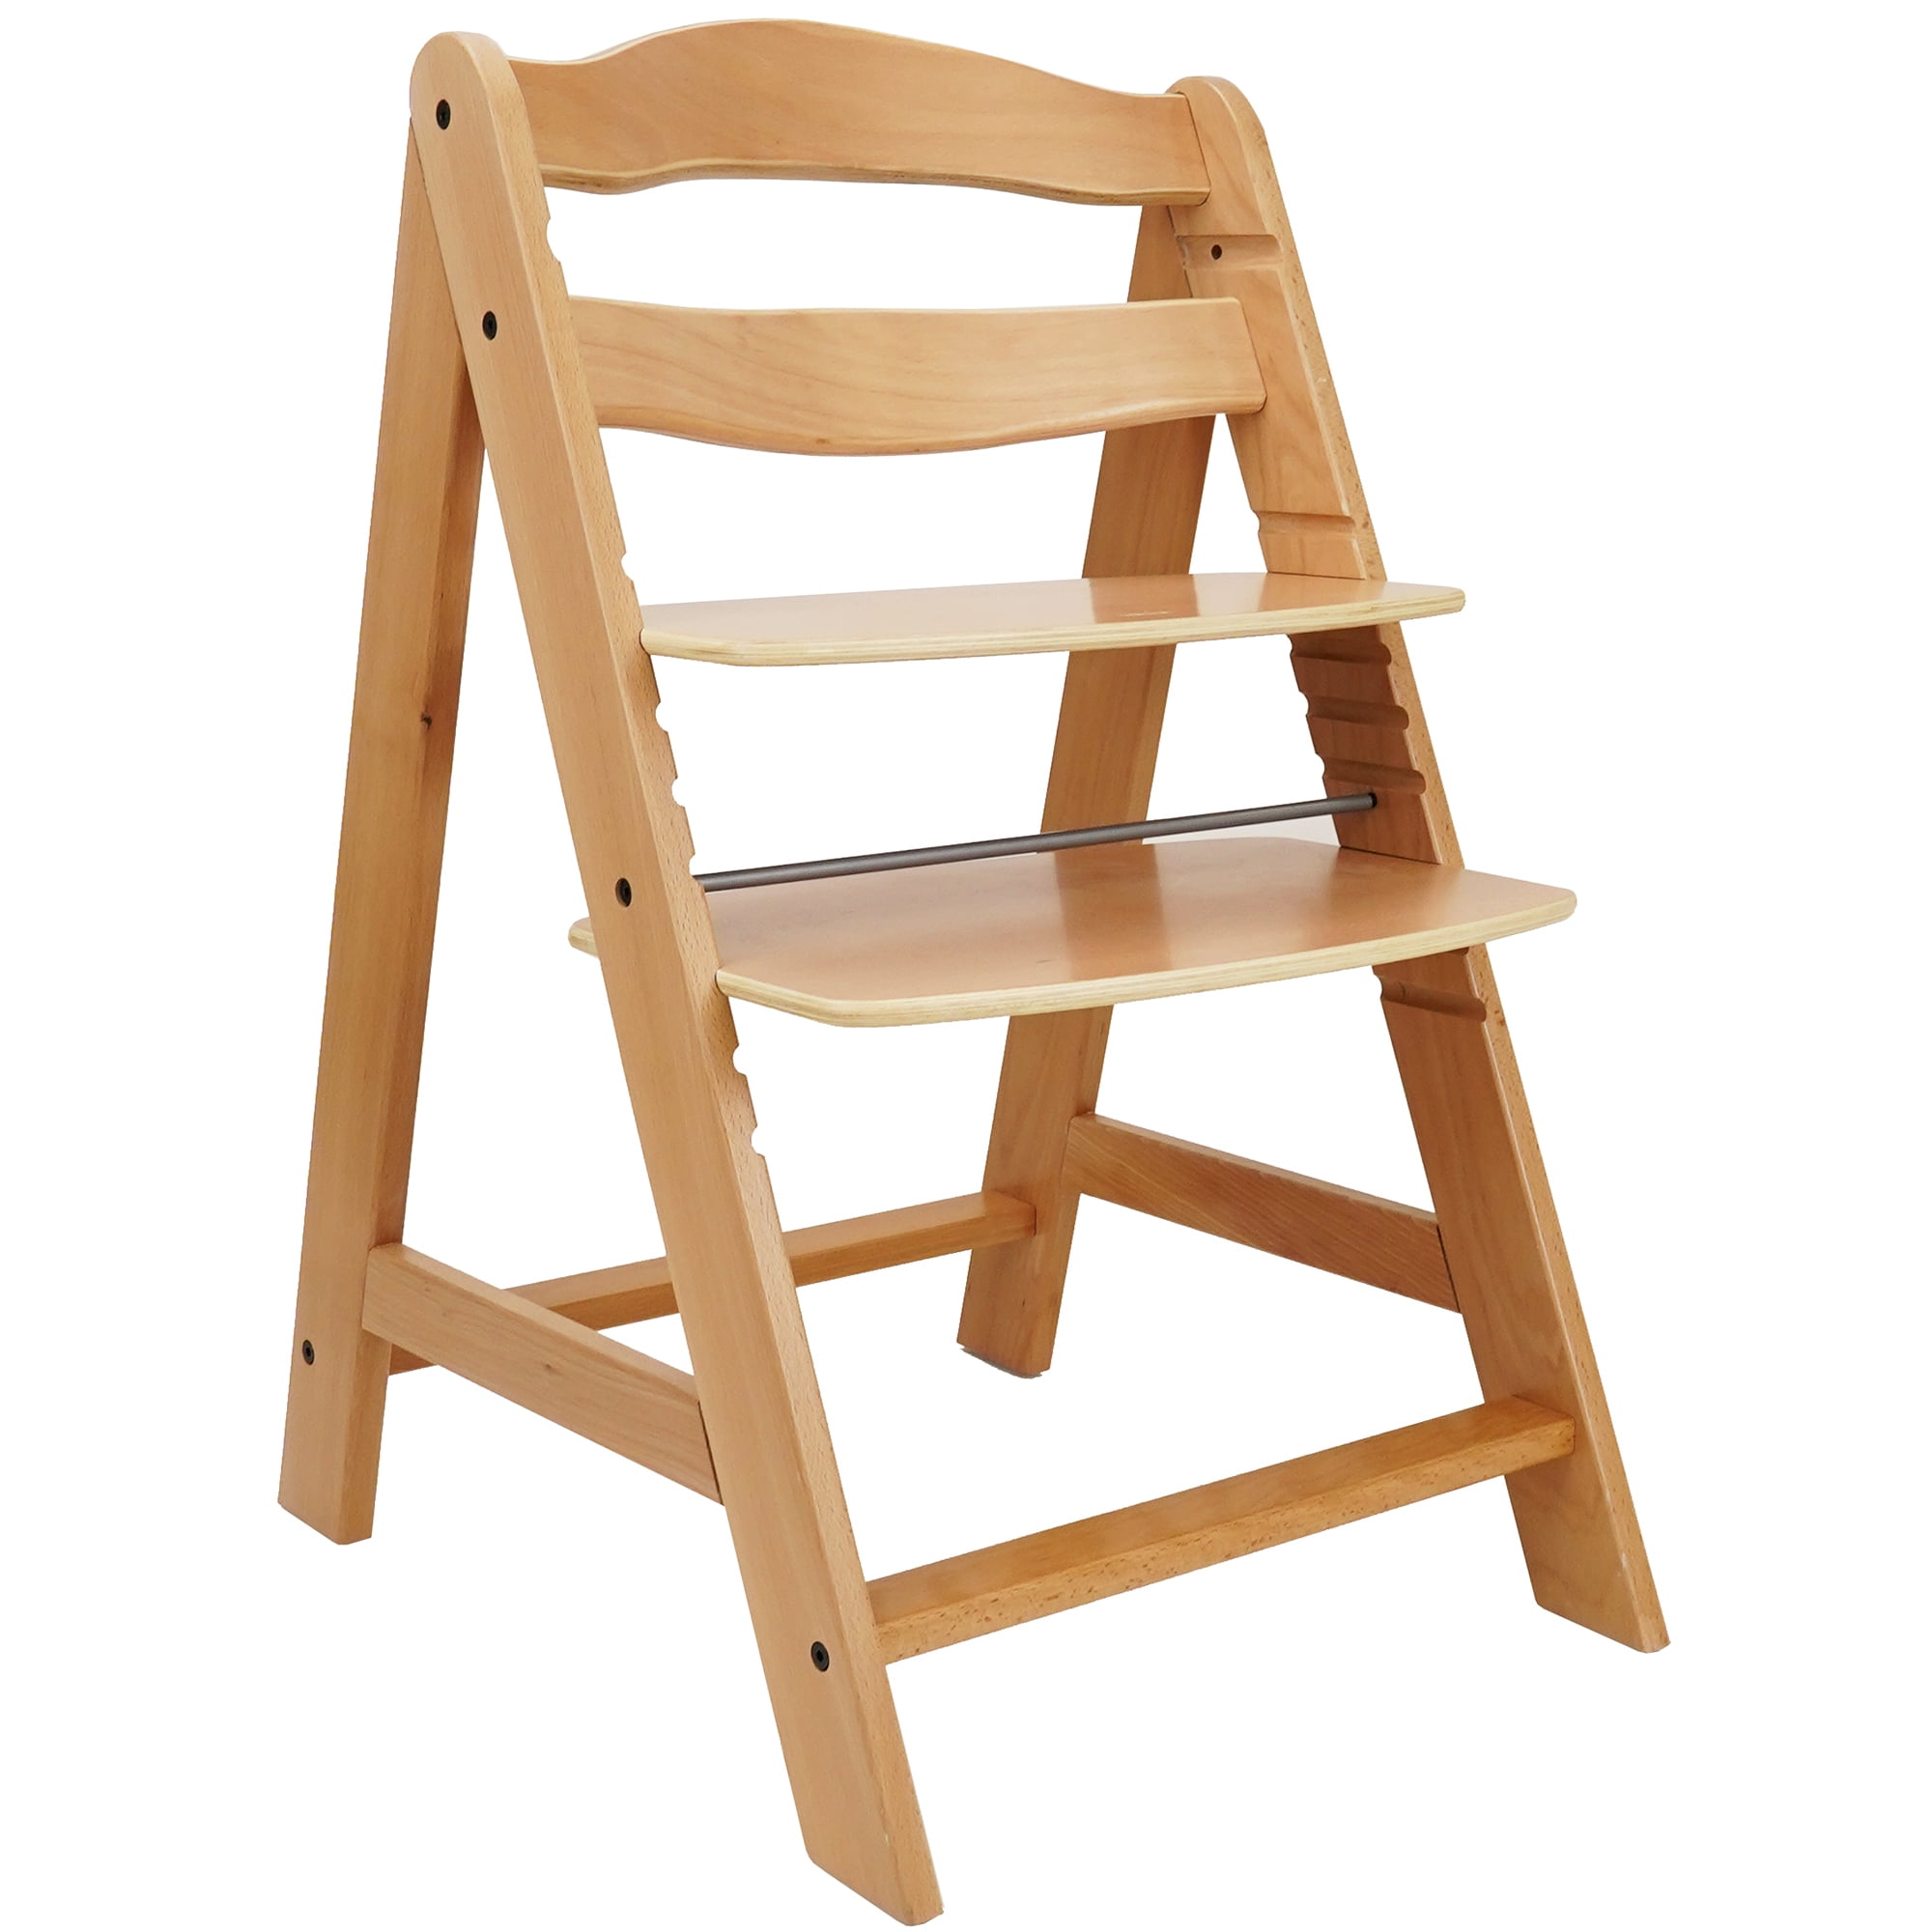 509 Sky Wooden Chair: Natural - Made Of Hard German Beechwood, Kids  Furniture, Adjustable Seat & Footrest, Ages 3+, Up to 218 lbs.